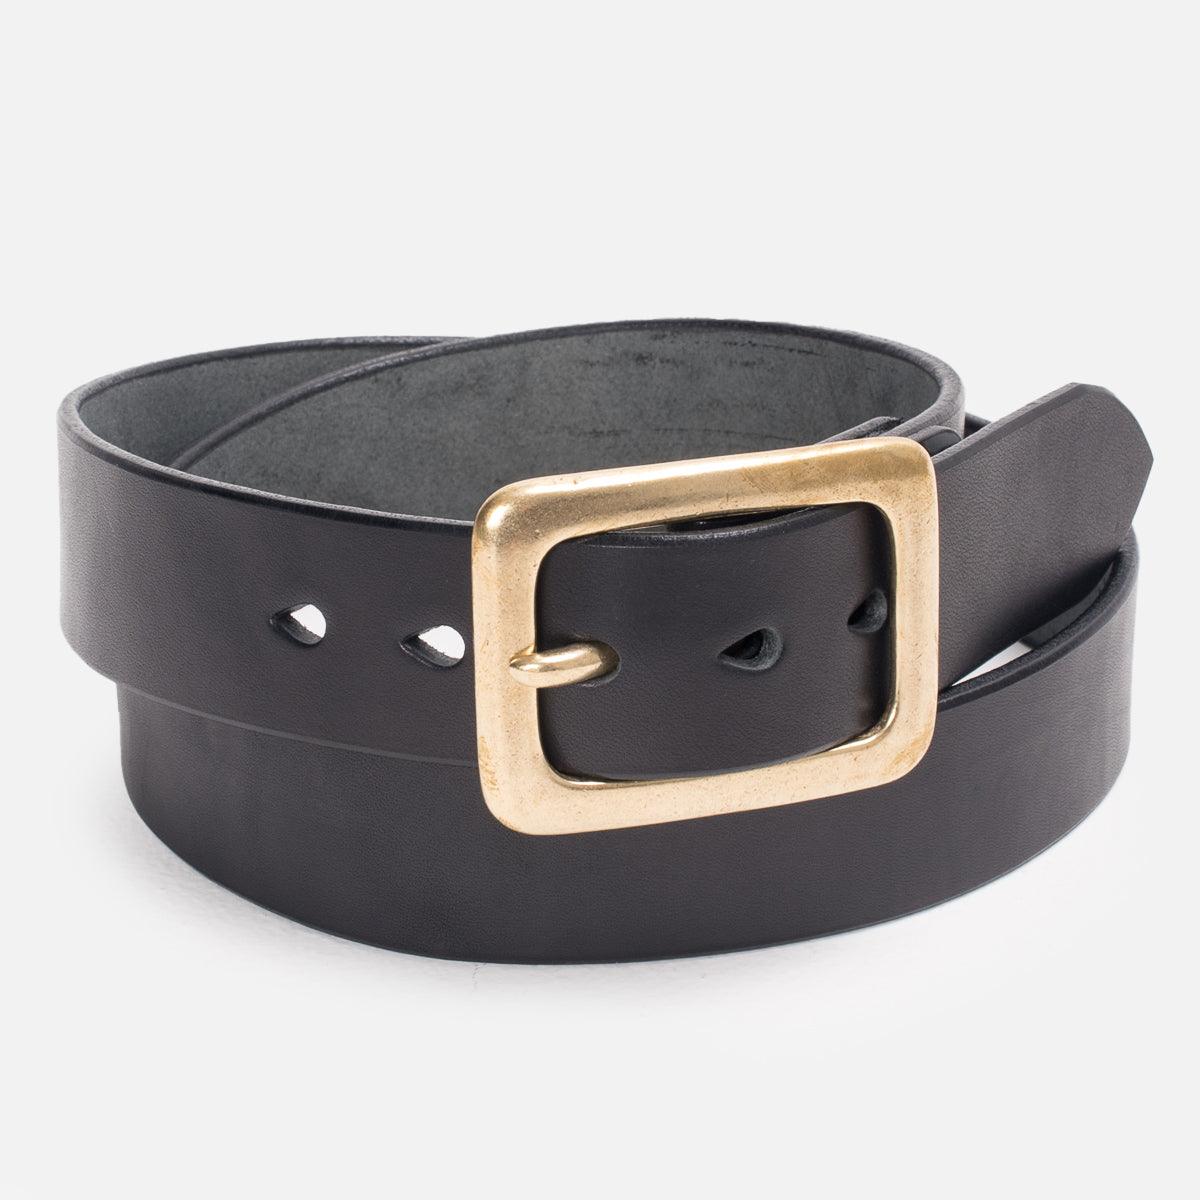 Image showing the IHB-11-BLK - Heavy Duty "Tochigi" Leather Belt Black which is a Belts described by the following info Accessories, Belts, Iron Heart, Released and sold on the IRON HEART GERMANY online store